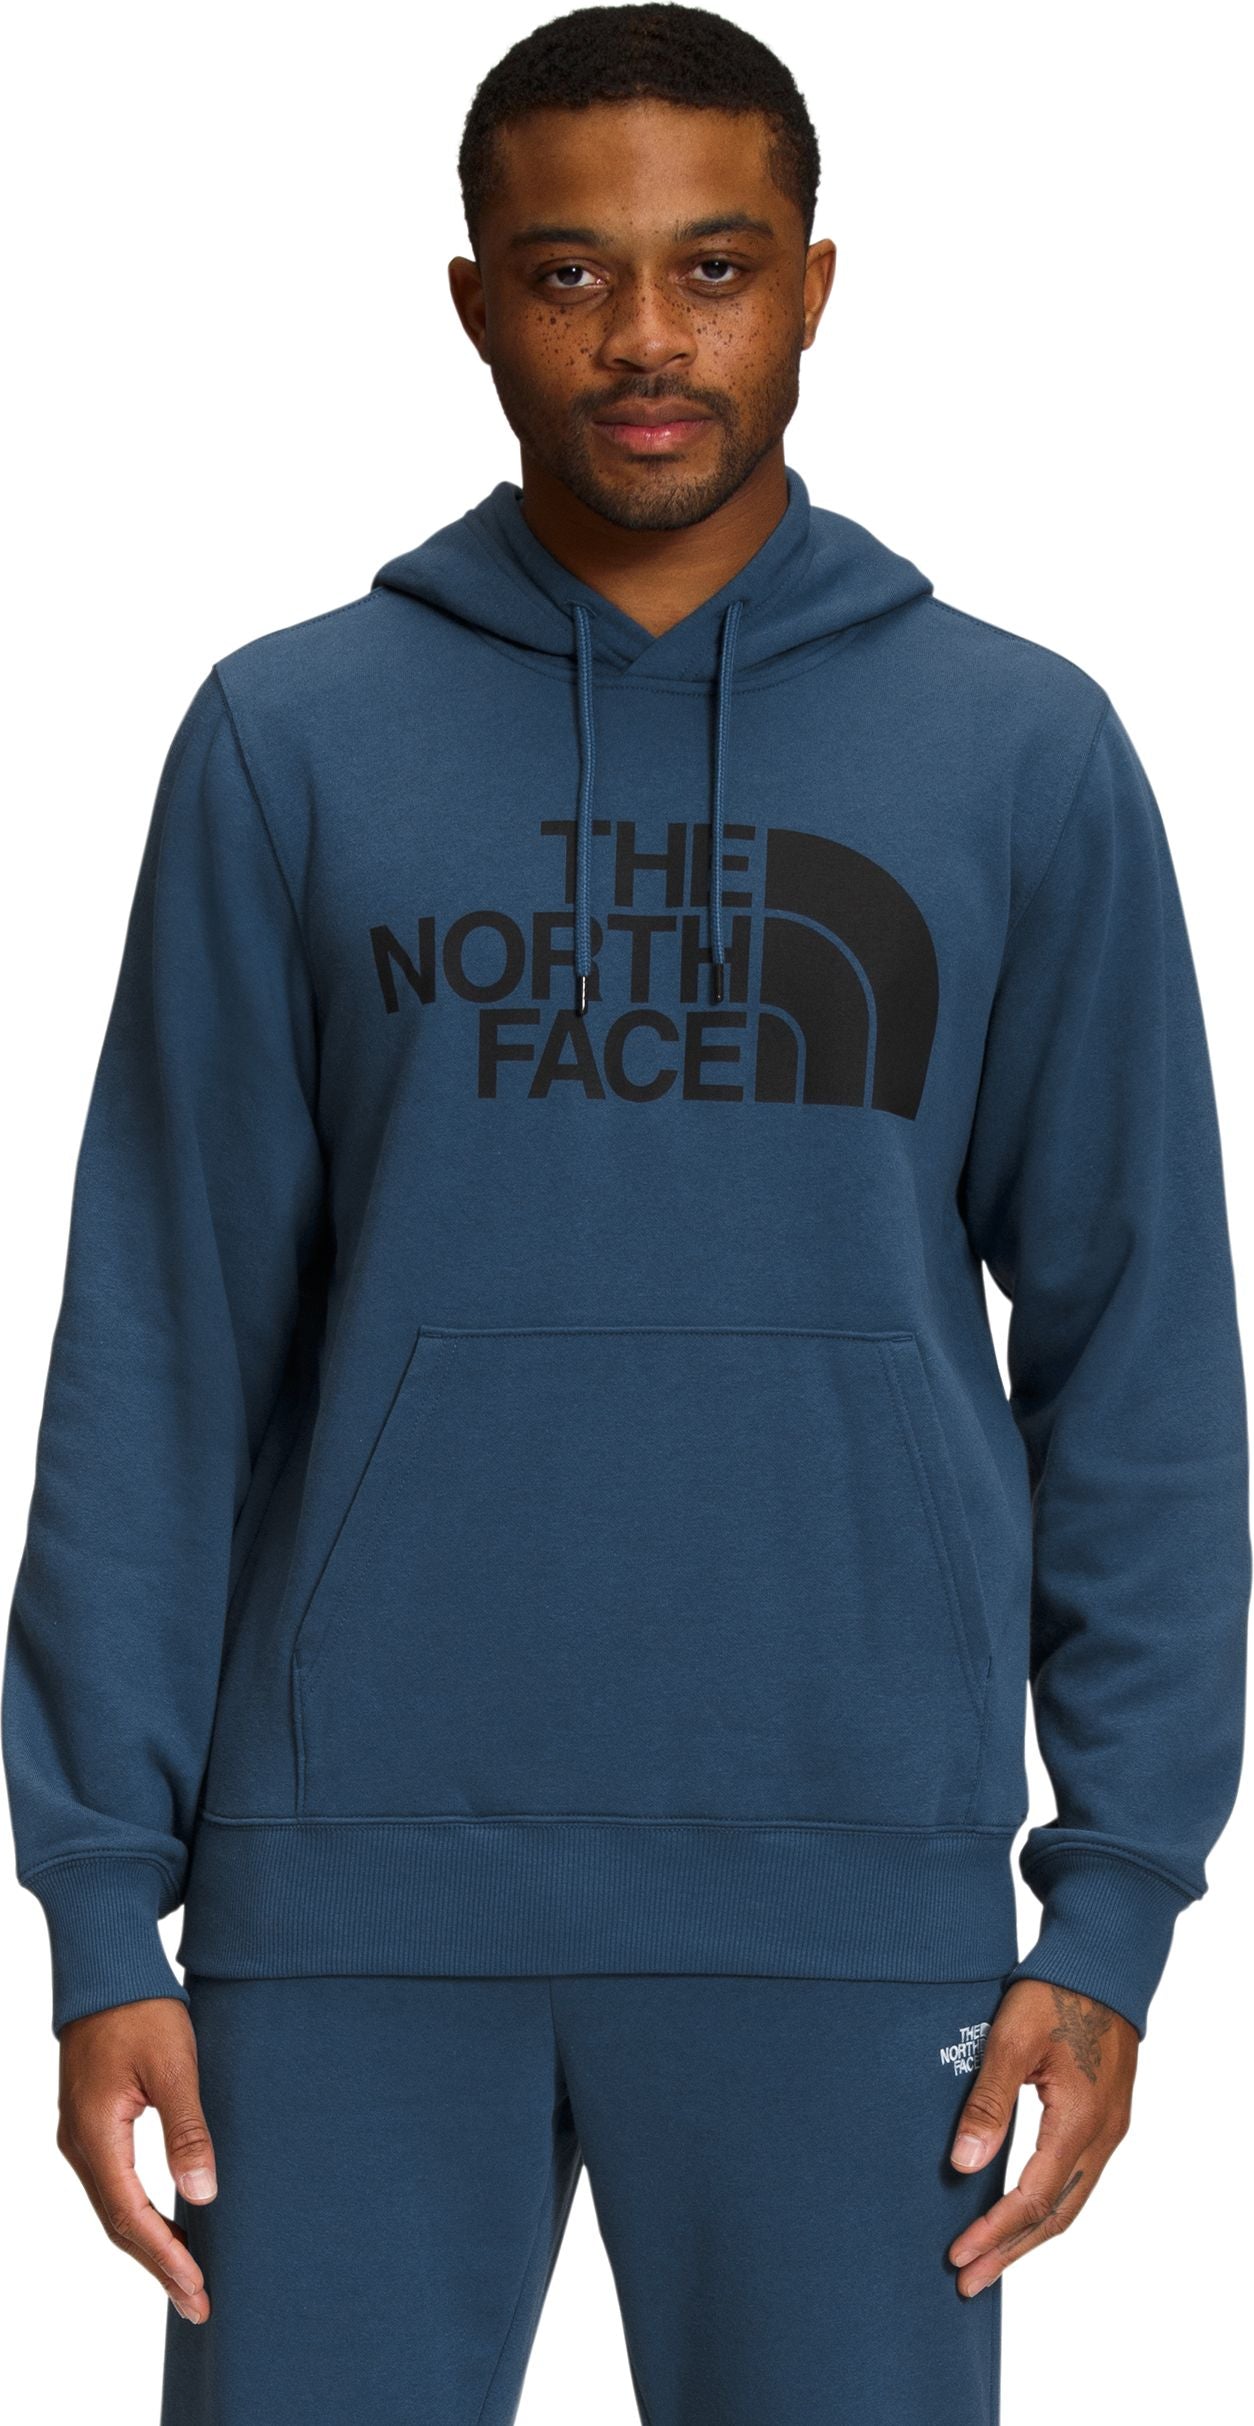 The North Face Apparel Men's Half Dome Pullover Hoodie Shady Blue Tnf Black